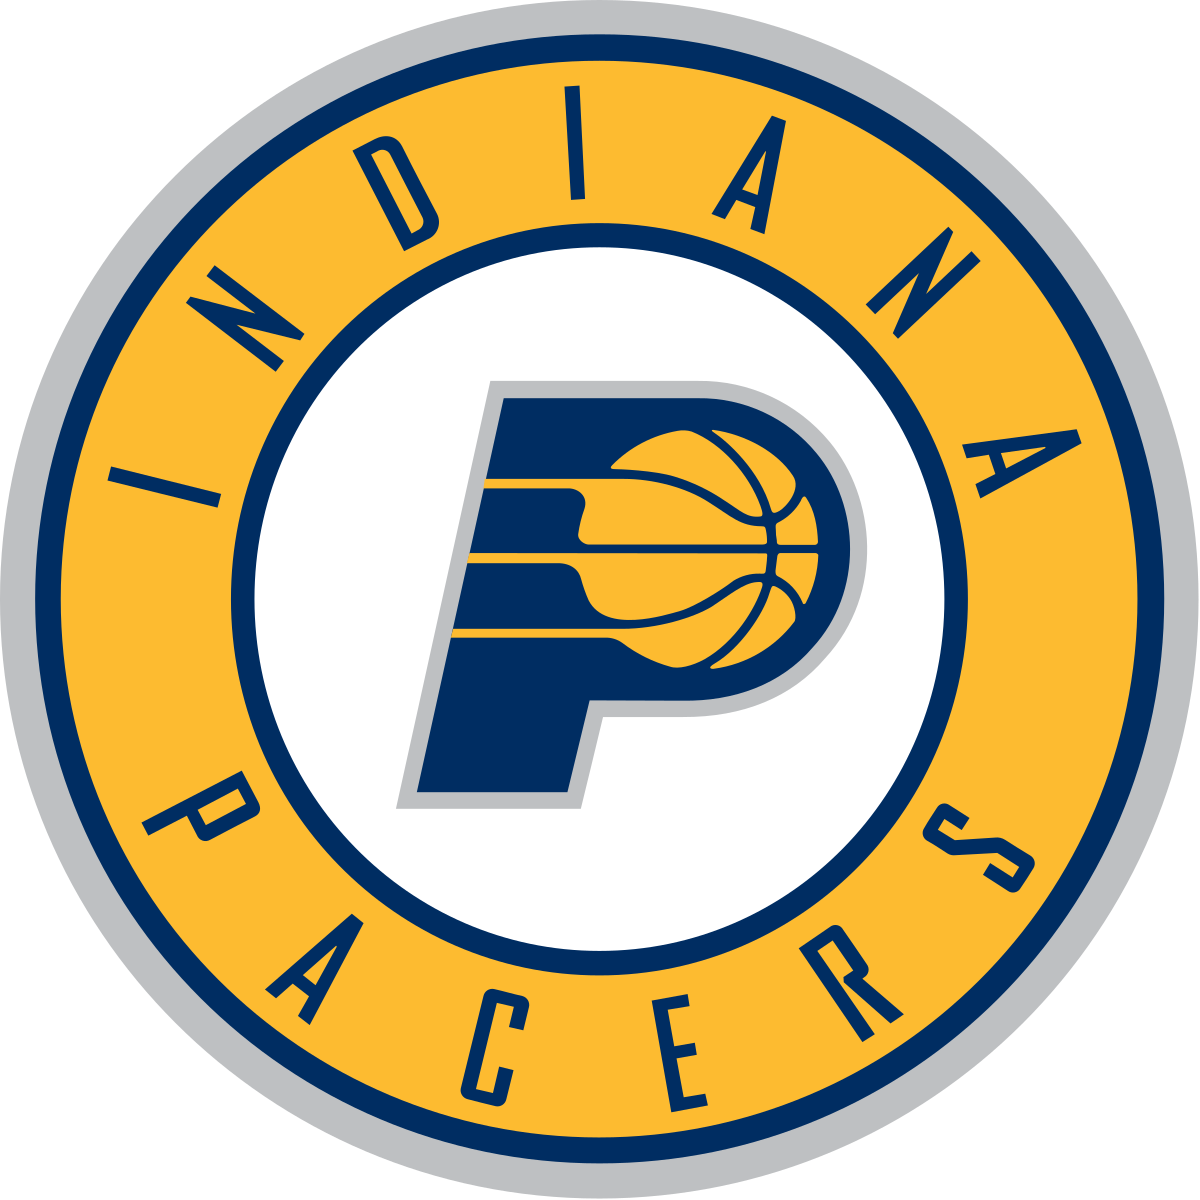 Indiana pacers logo